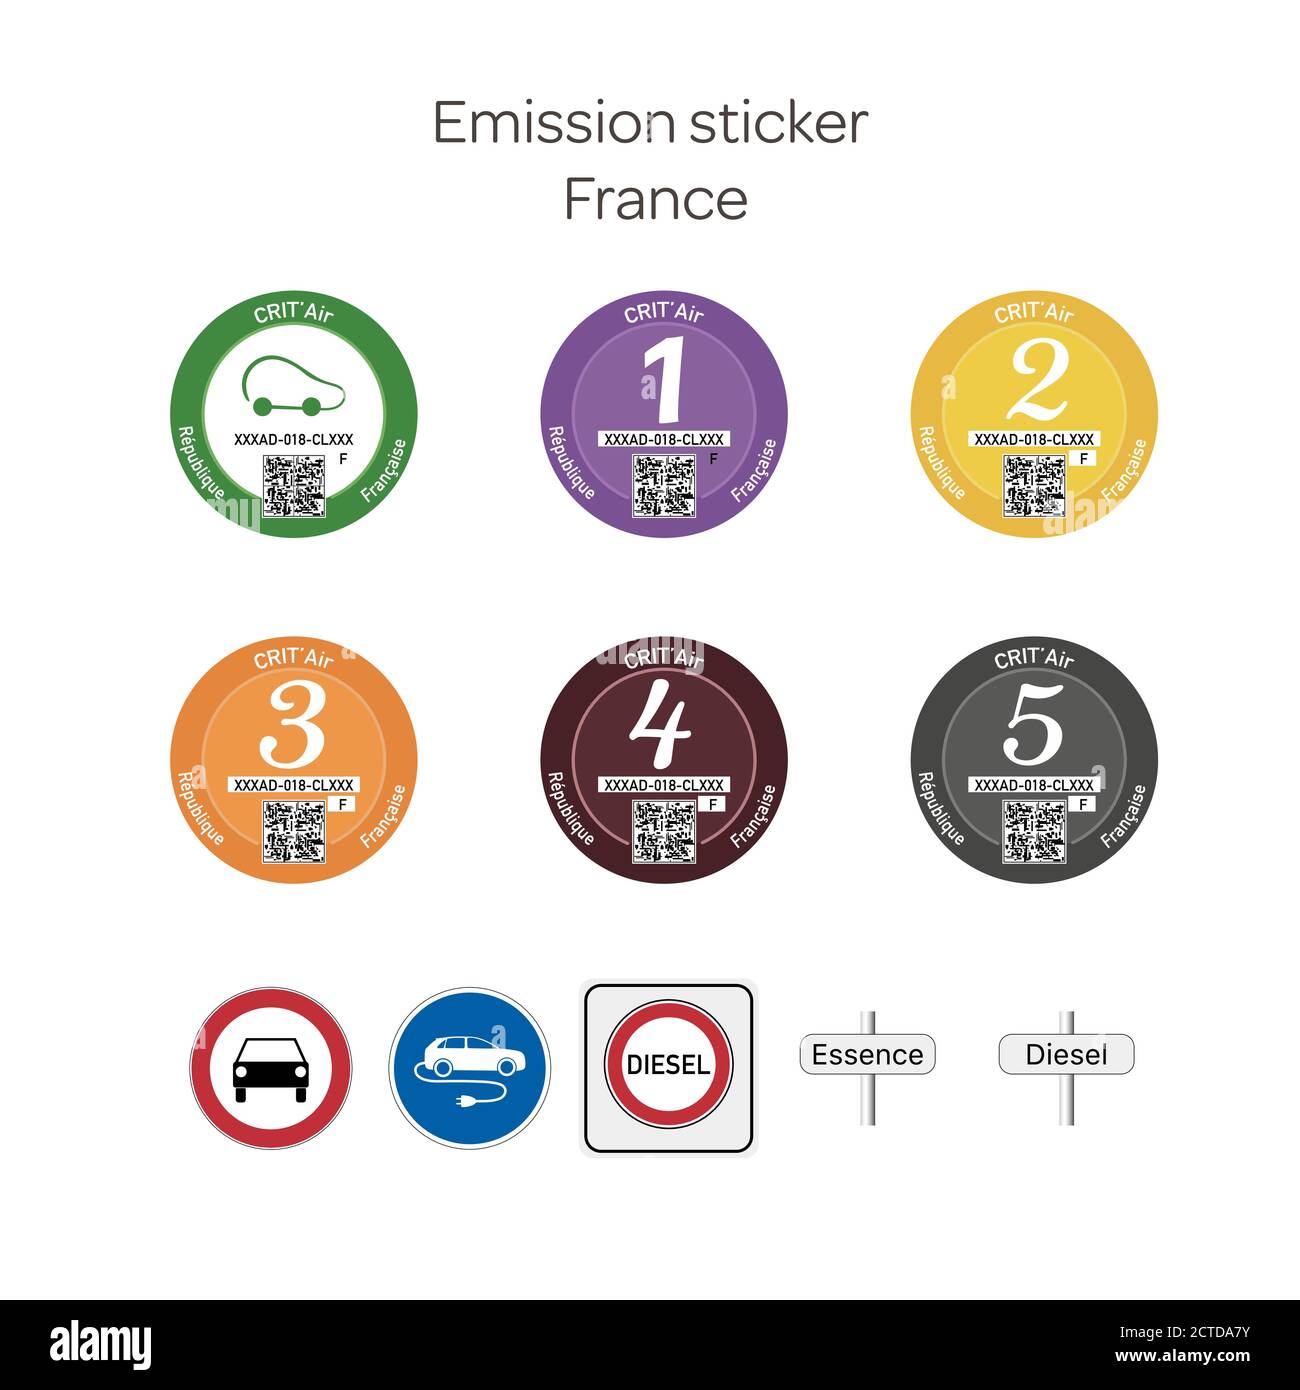 Emission sticker. French emission stickers for cars and traffic signs prohibiting the use of diesel vehicles (in French). Stock Vector